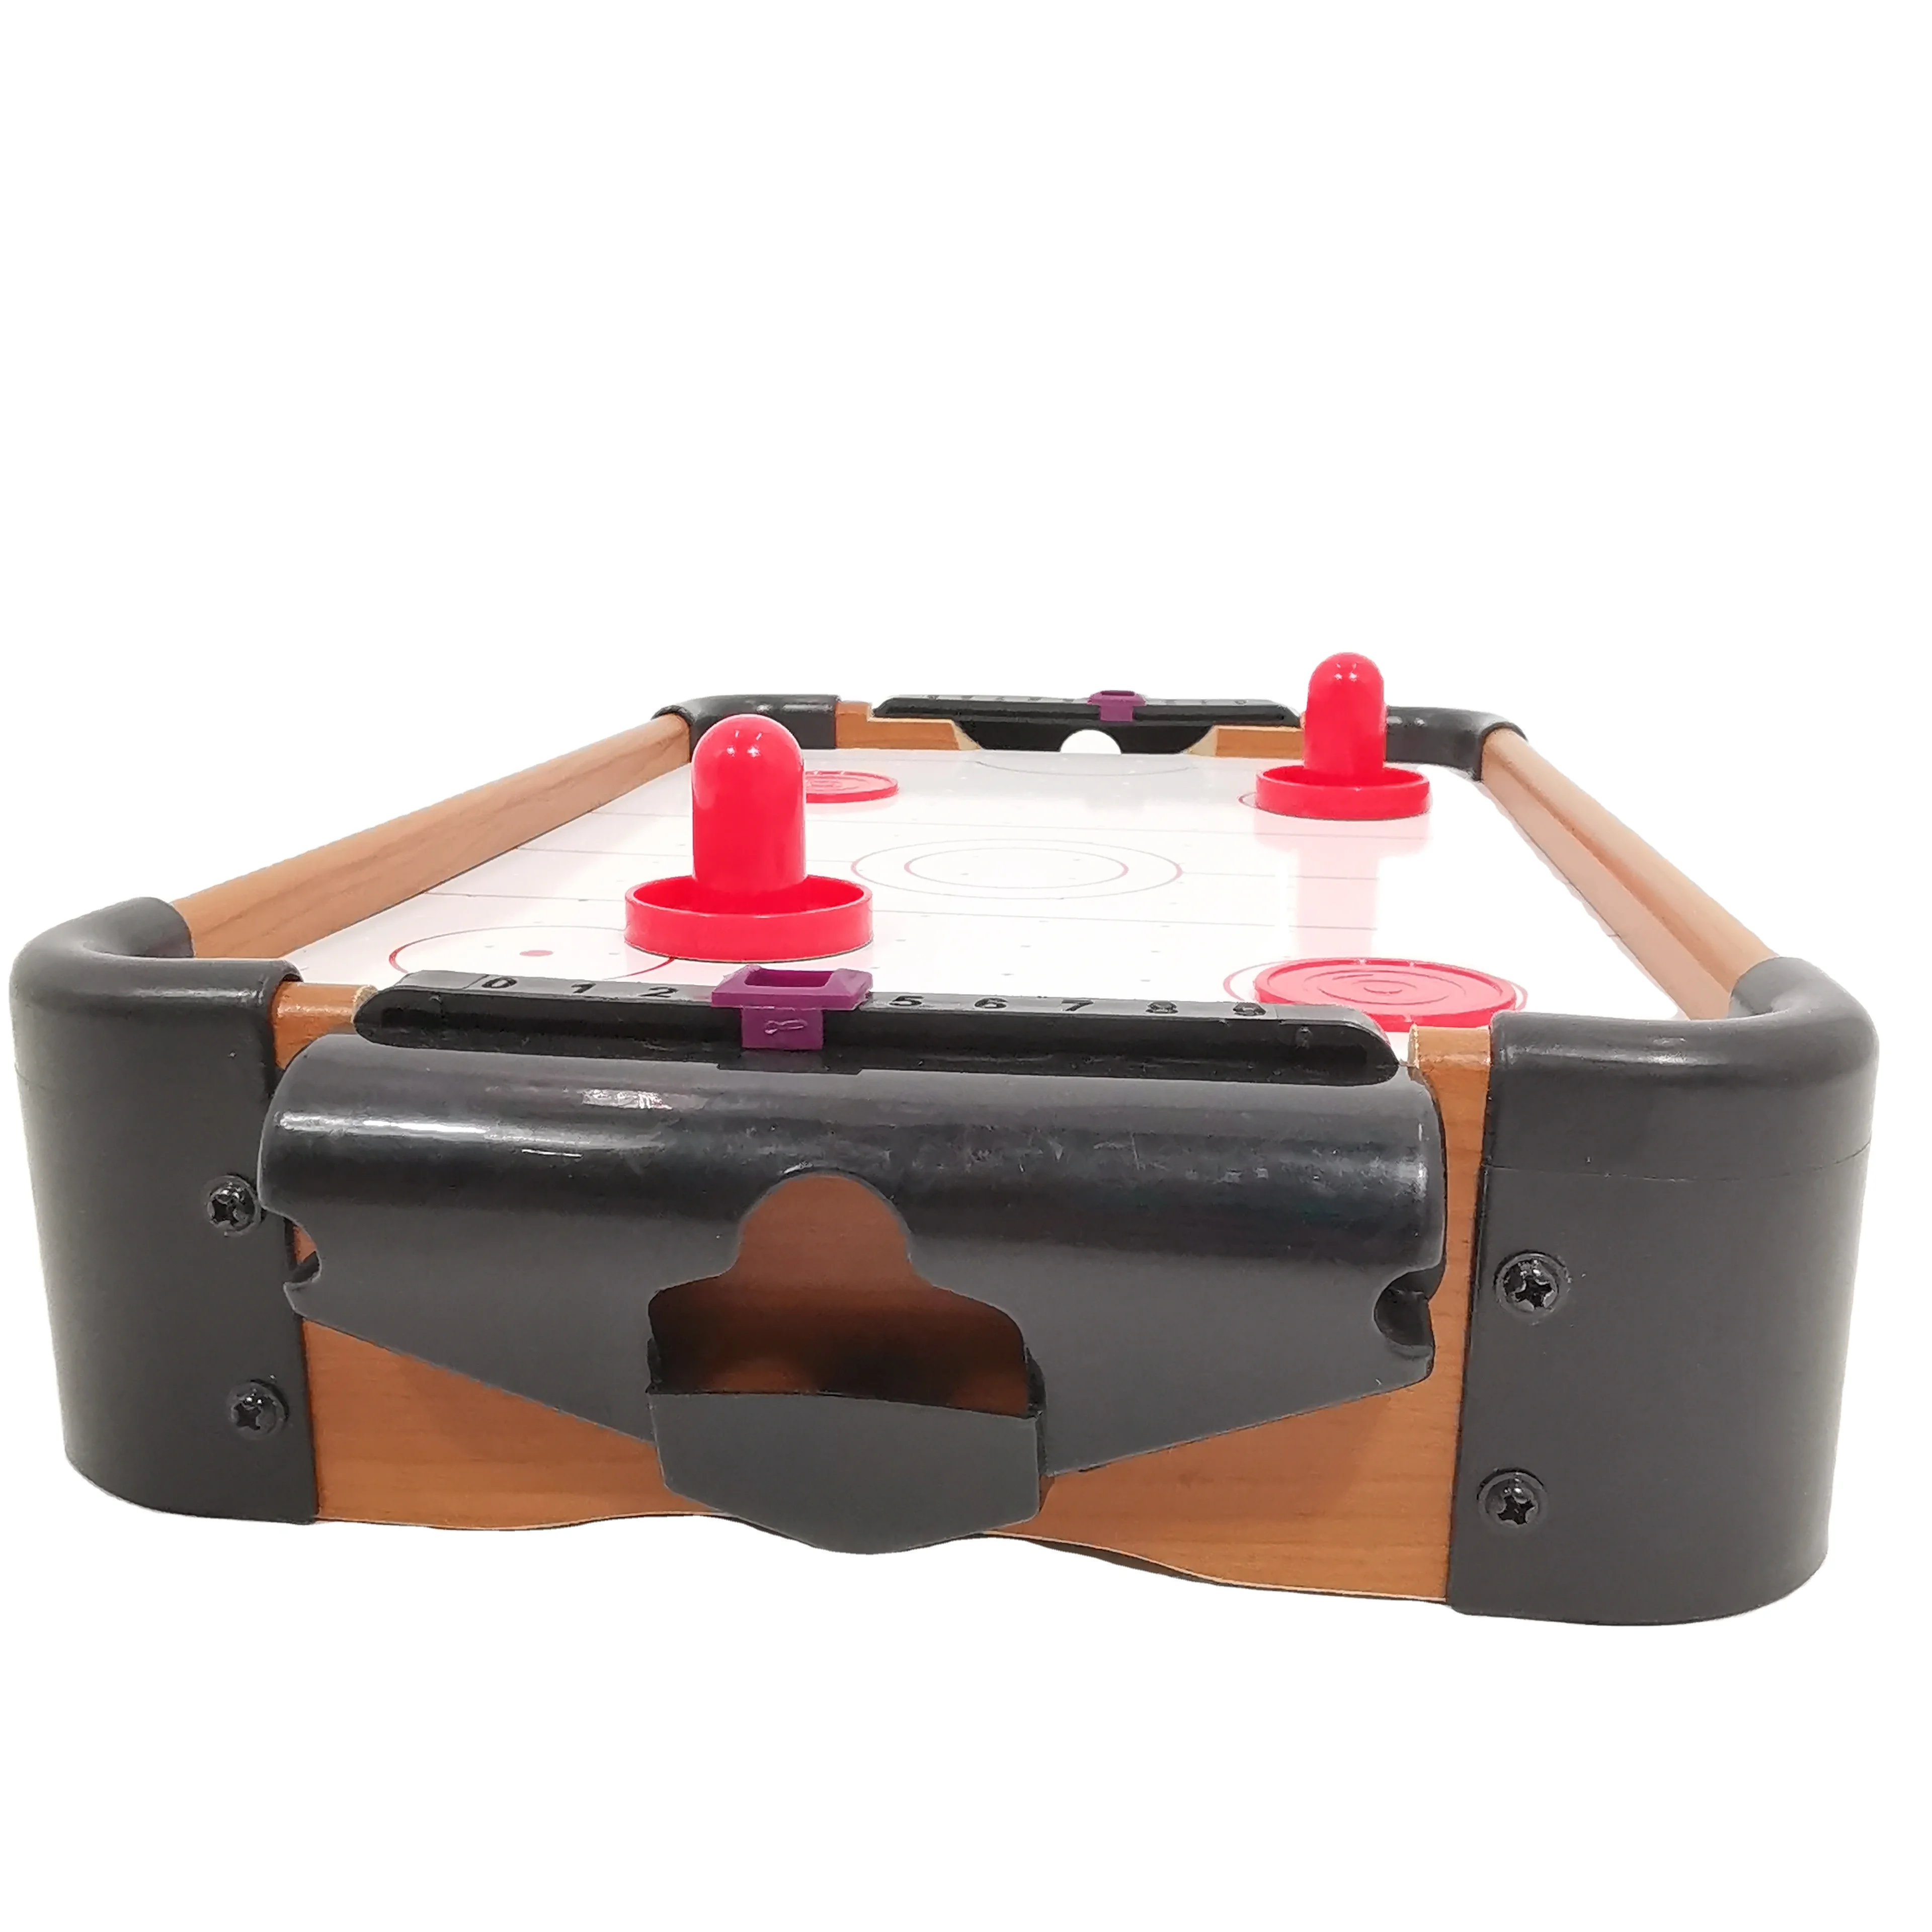 
Exquisite Structure Manufacturing Air Hockey Table Cheap Air Hockey Table 